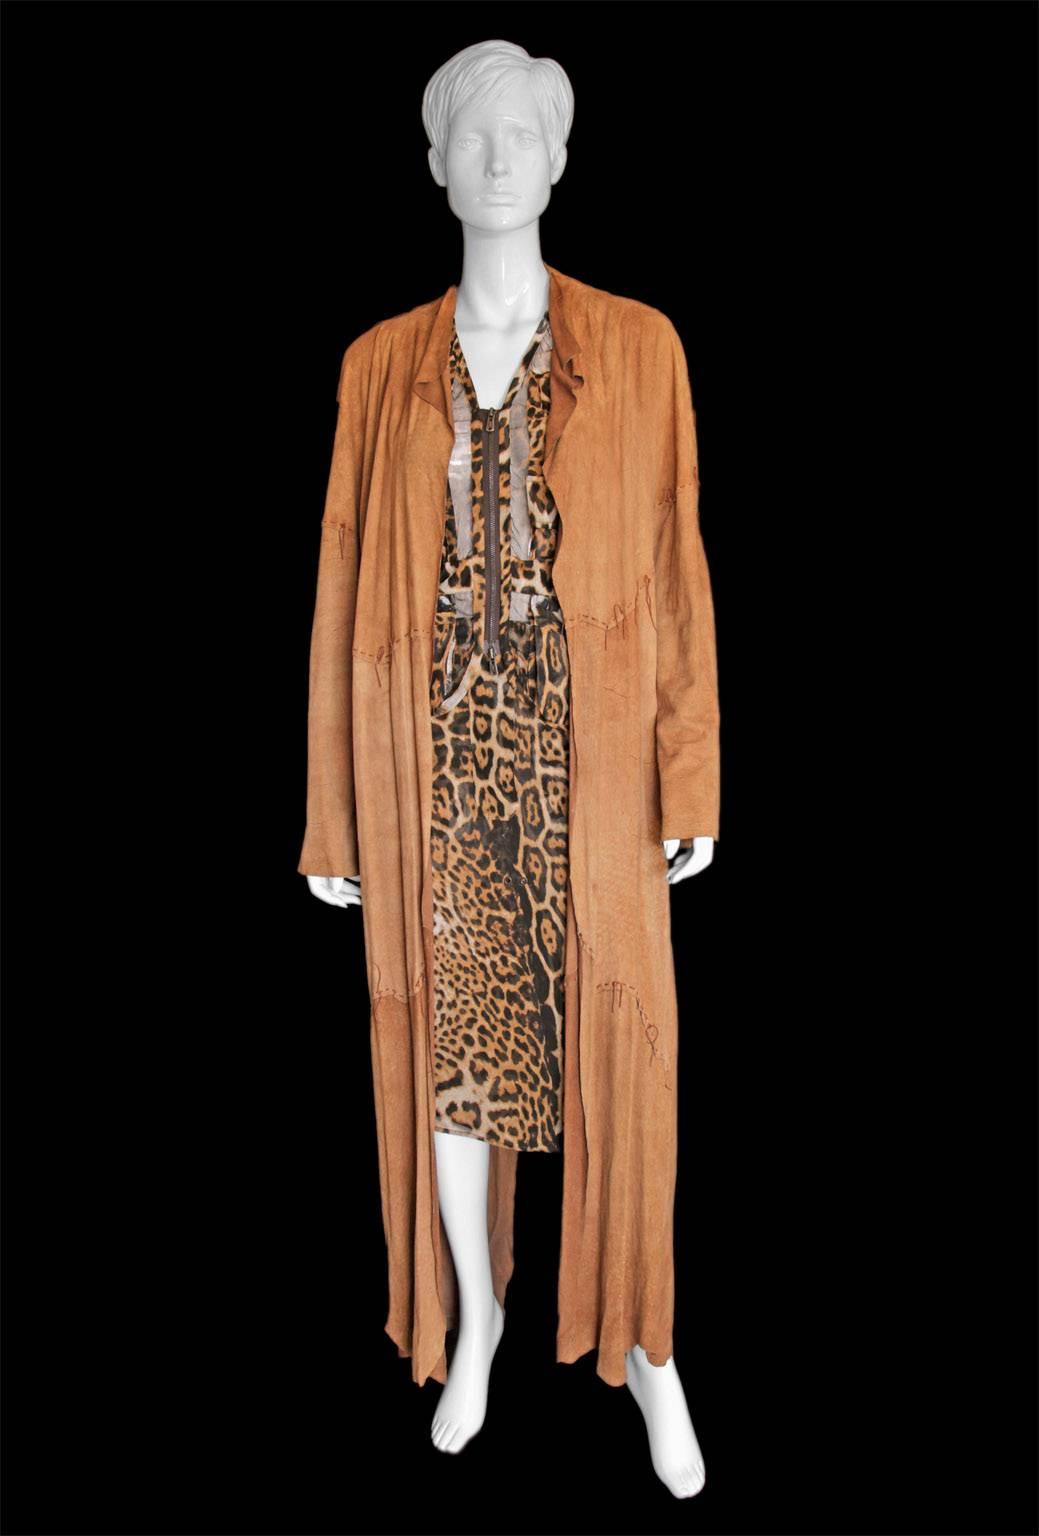 One of the most extraordinary pieces from Tom Ford's acclaimed Spring/Summer 2002 Safari/Mombasa Runway Collection for YSL Rive Gauche, this incredible full length suede leather coat is made from a number of entire hides, hand-stitched together